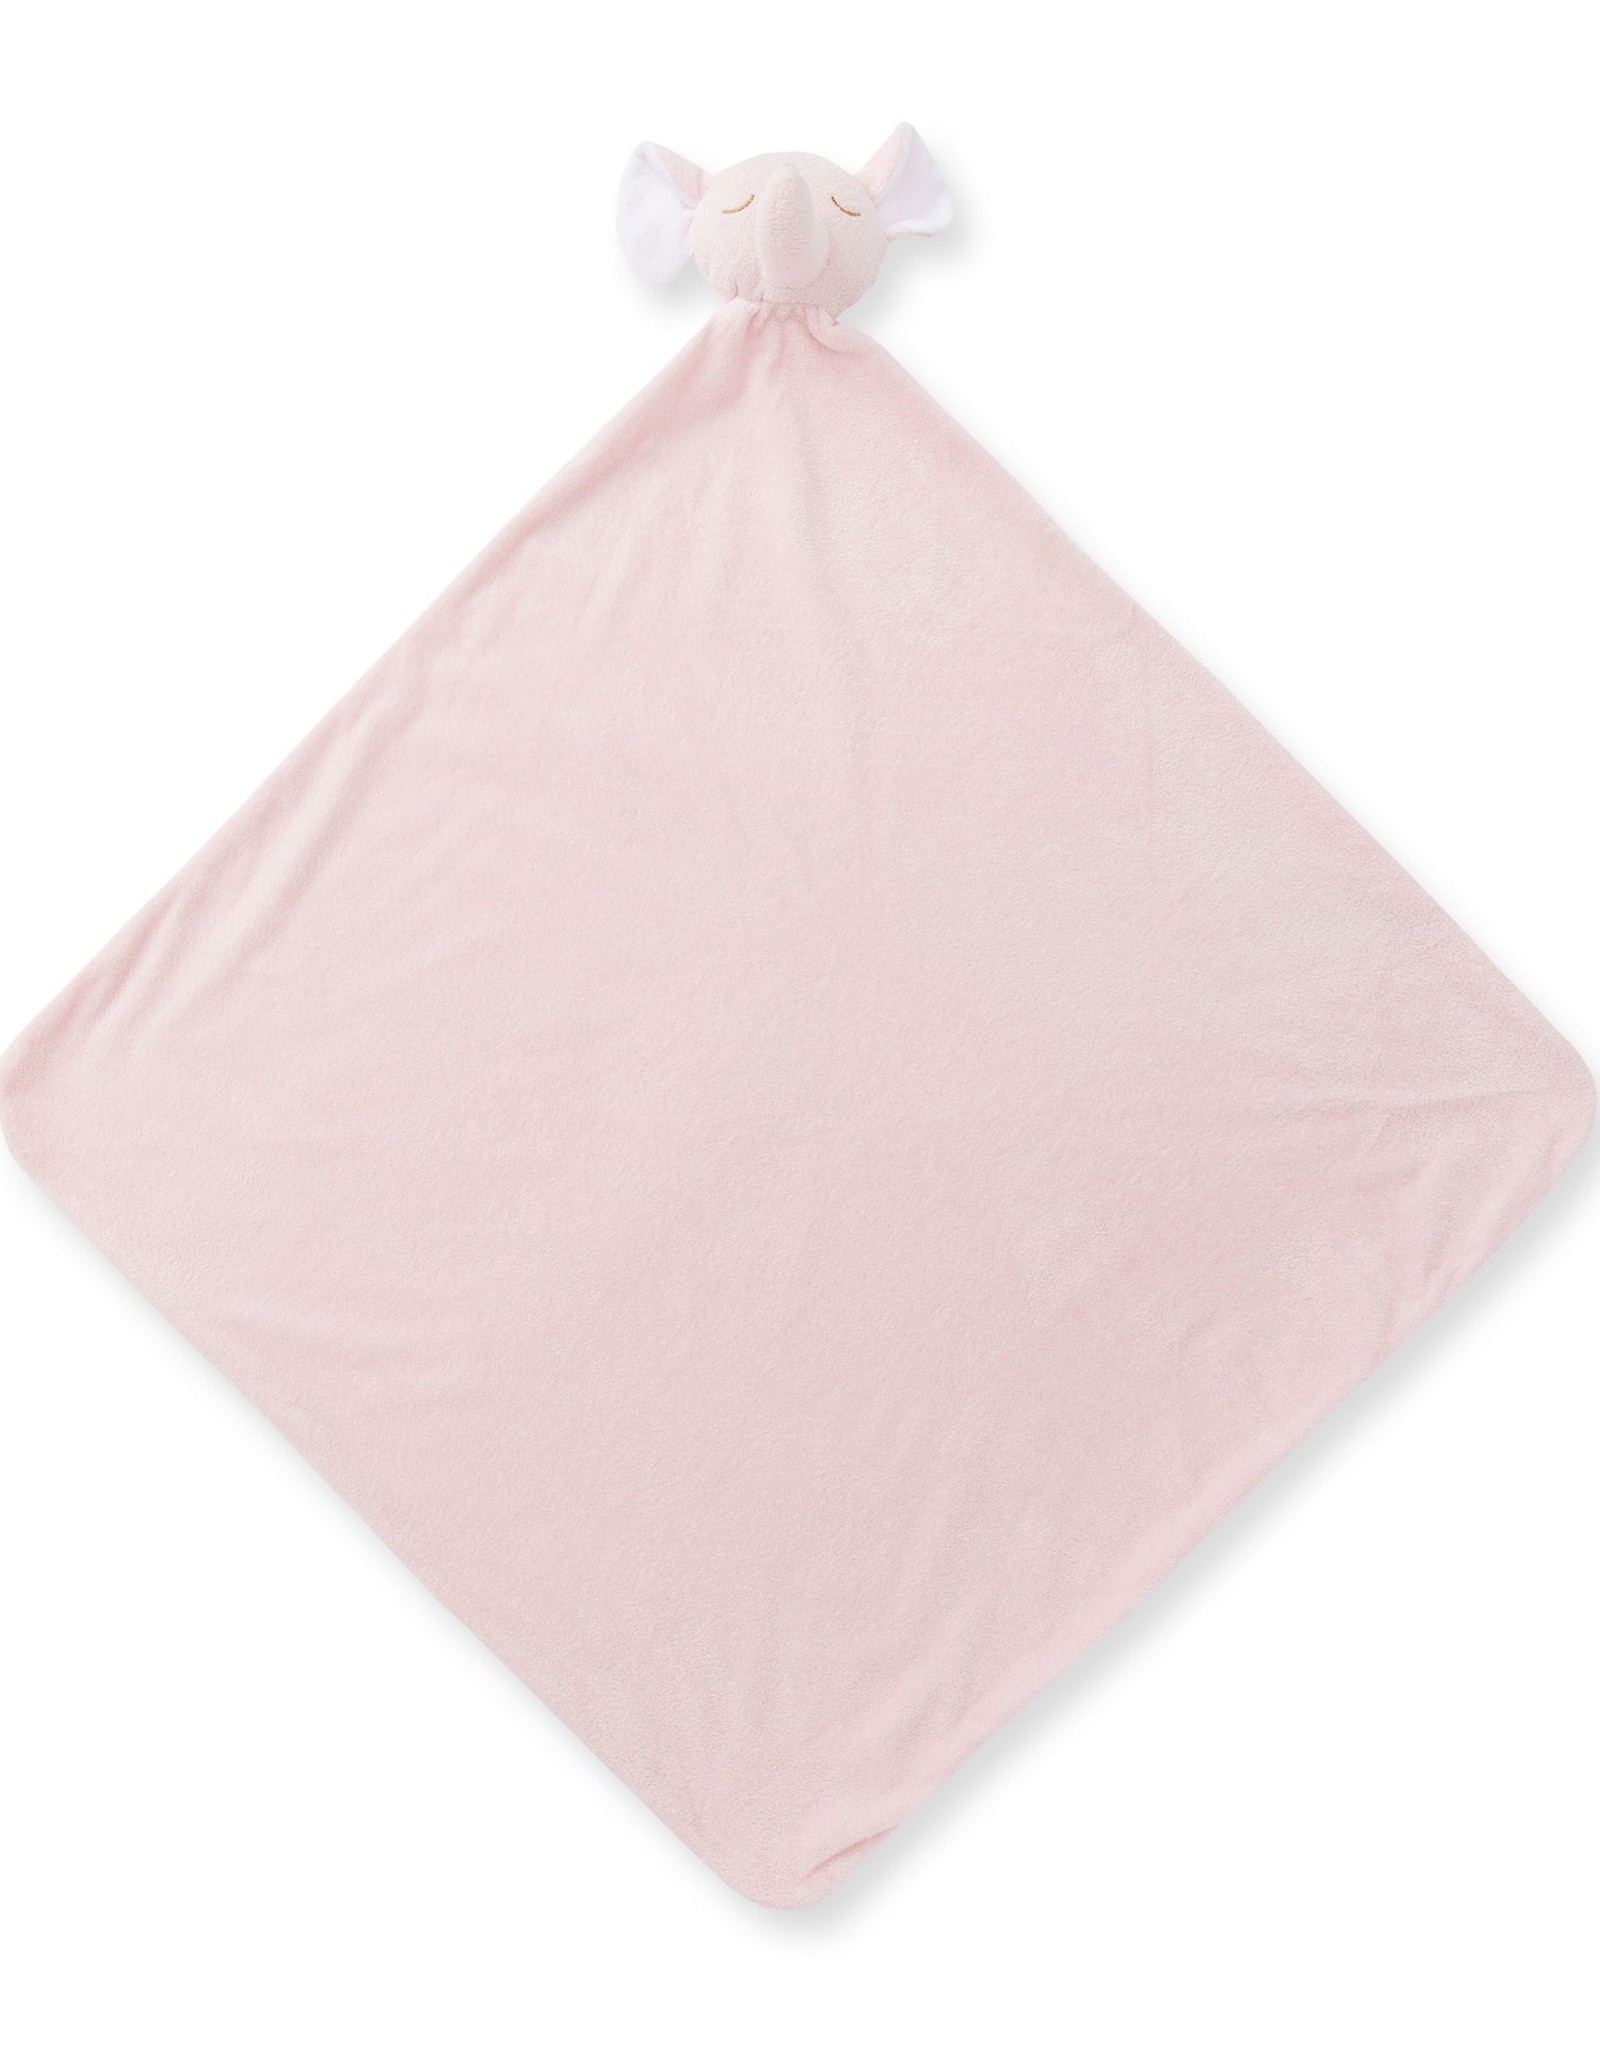 Angel Dear Napping Blanket AD pink elephant